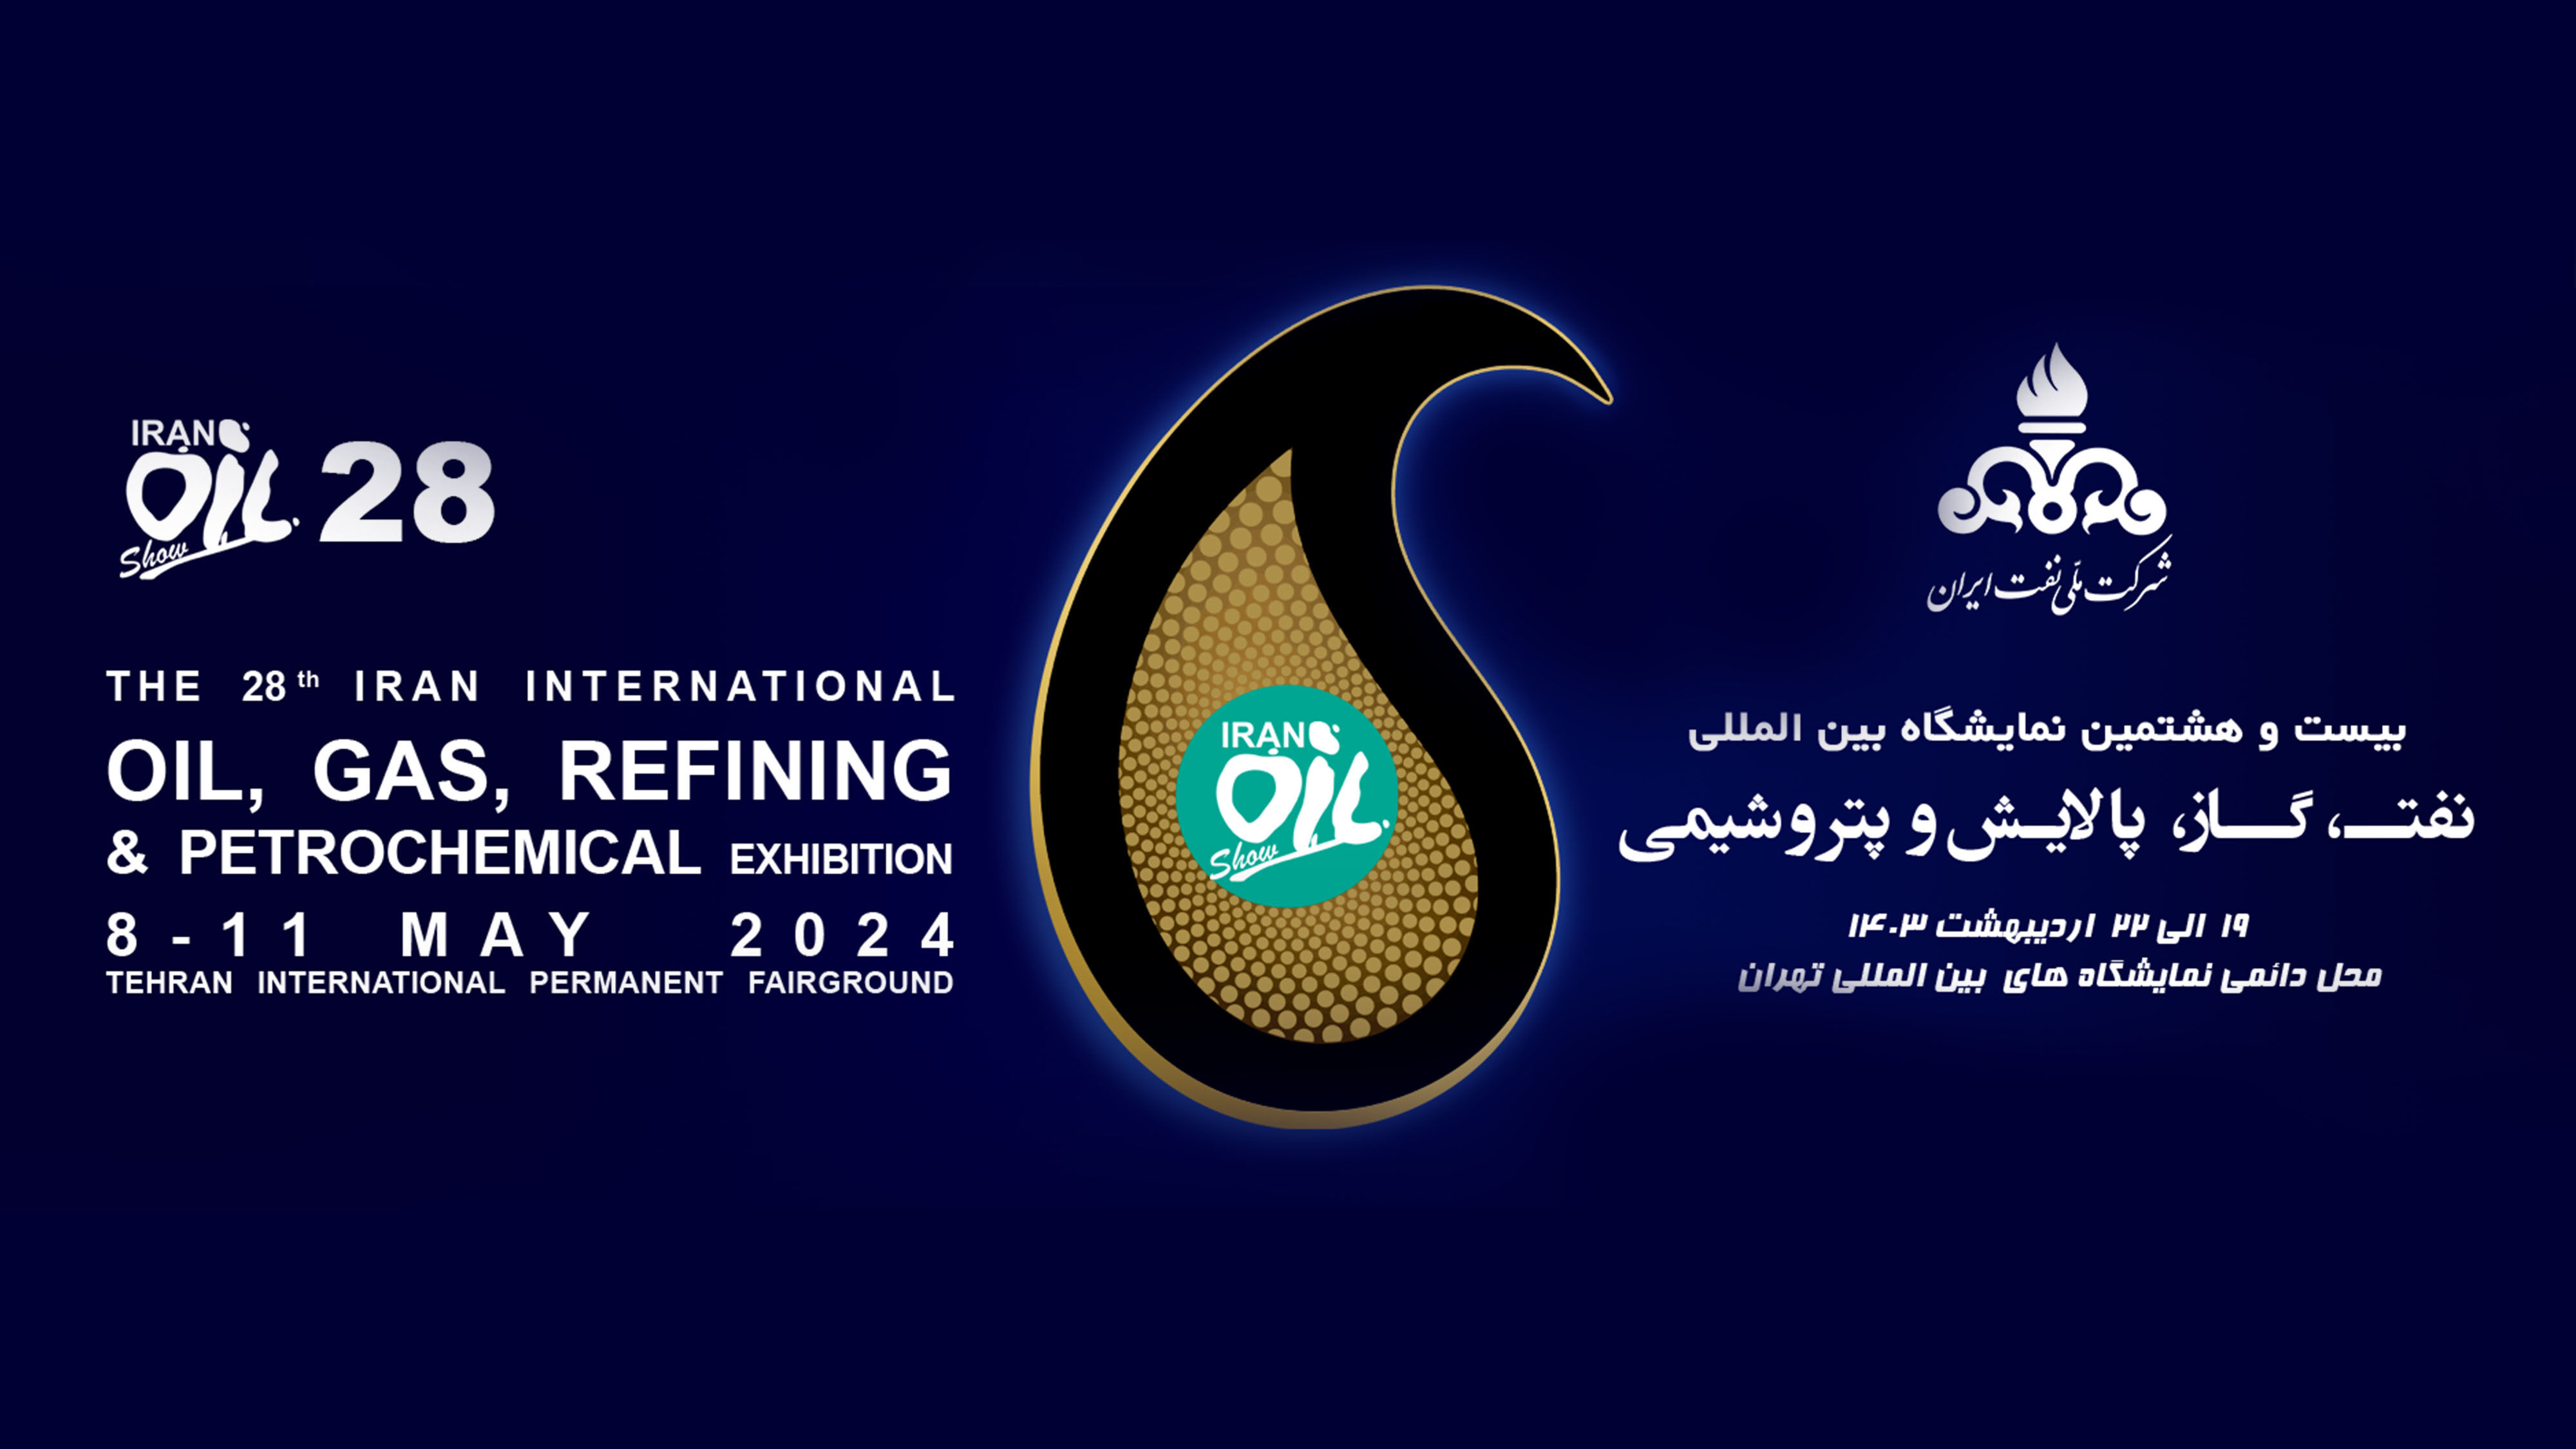 Let Us Meet at the 28th Iran Oil Show!